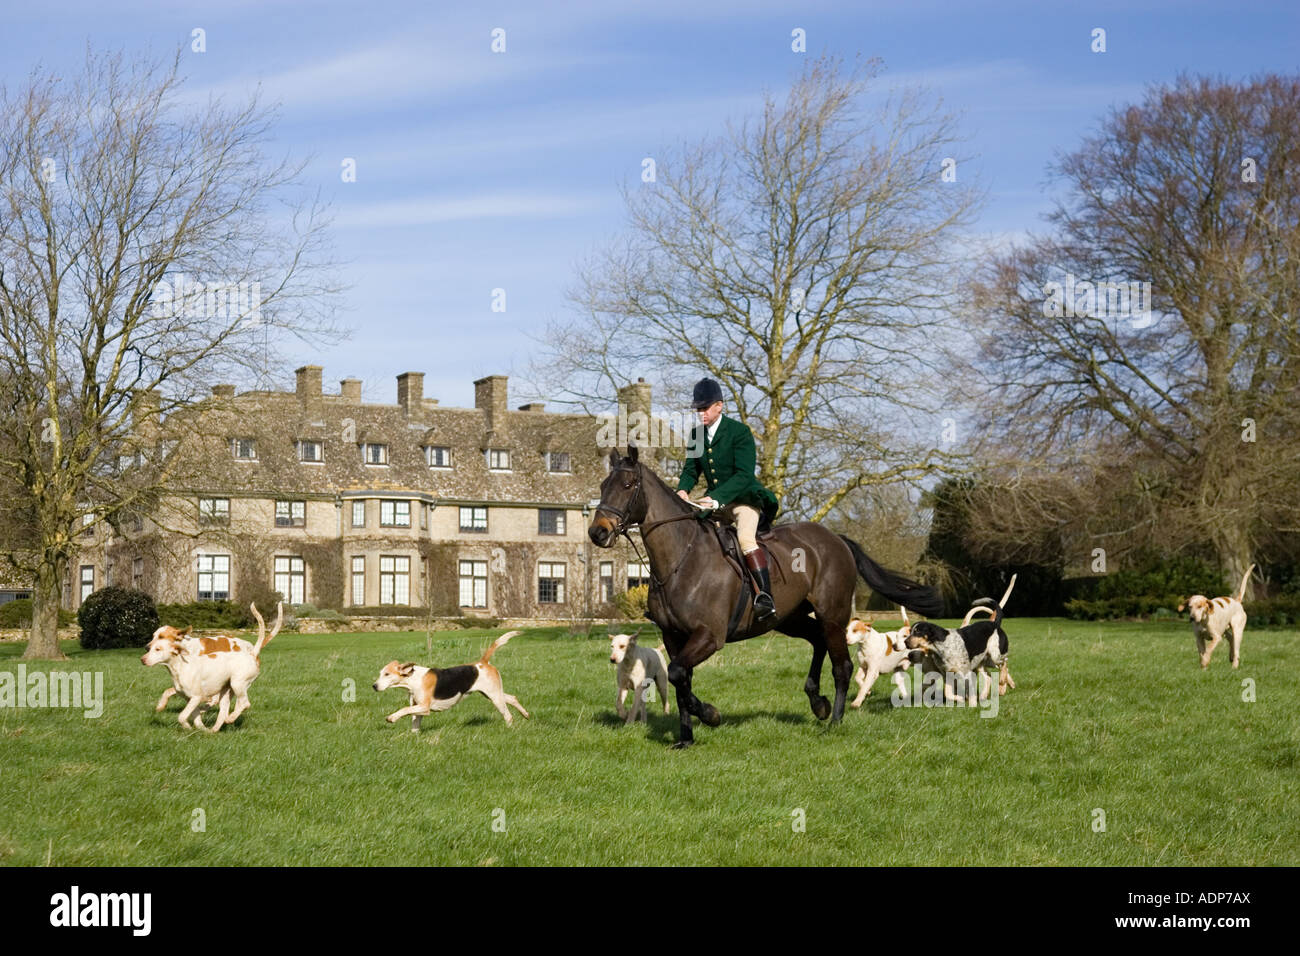 Member of Heythrop Hunt rides with hounds at traditional Hunt Meet on Swinbrook House Estate in Oxfordshire United Kingdom Stock Photo